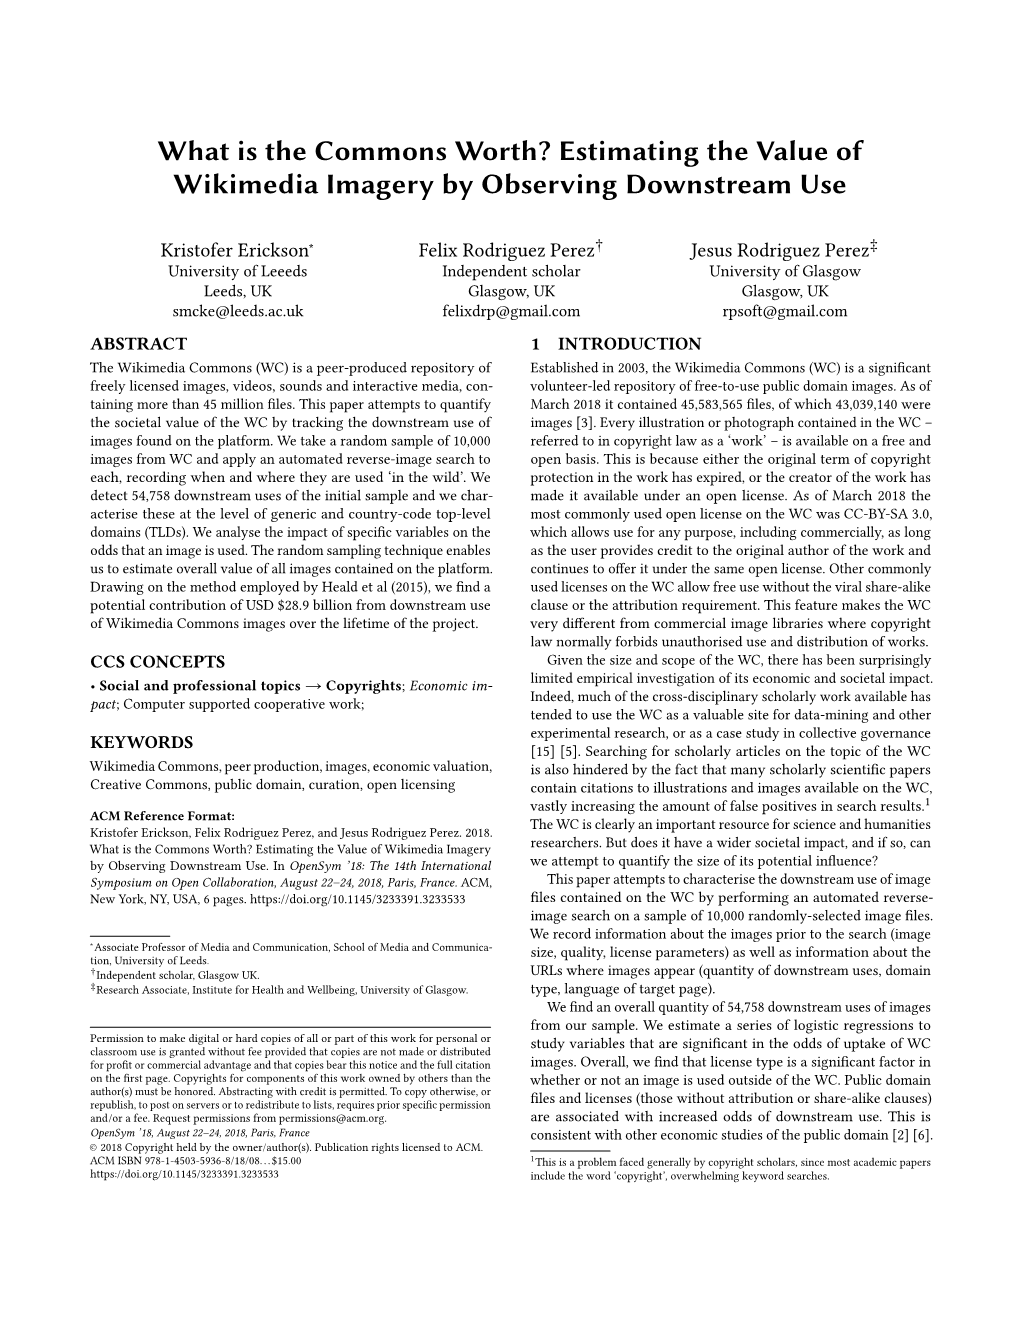 What Is the Commons Worth? Estimating the Value of Wikimedia Imagery by Observing Downstream Use